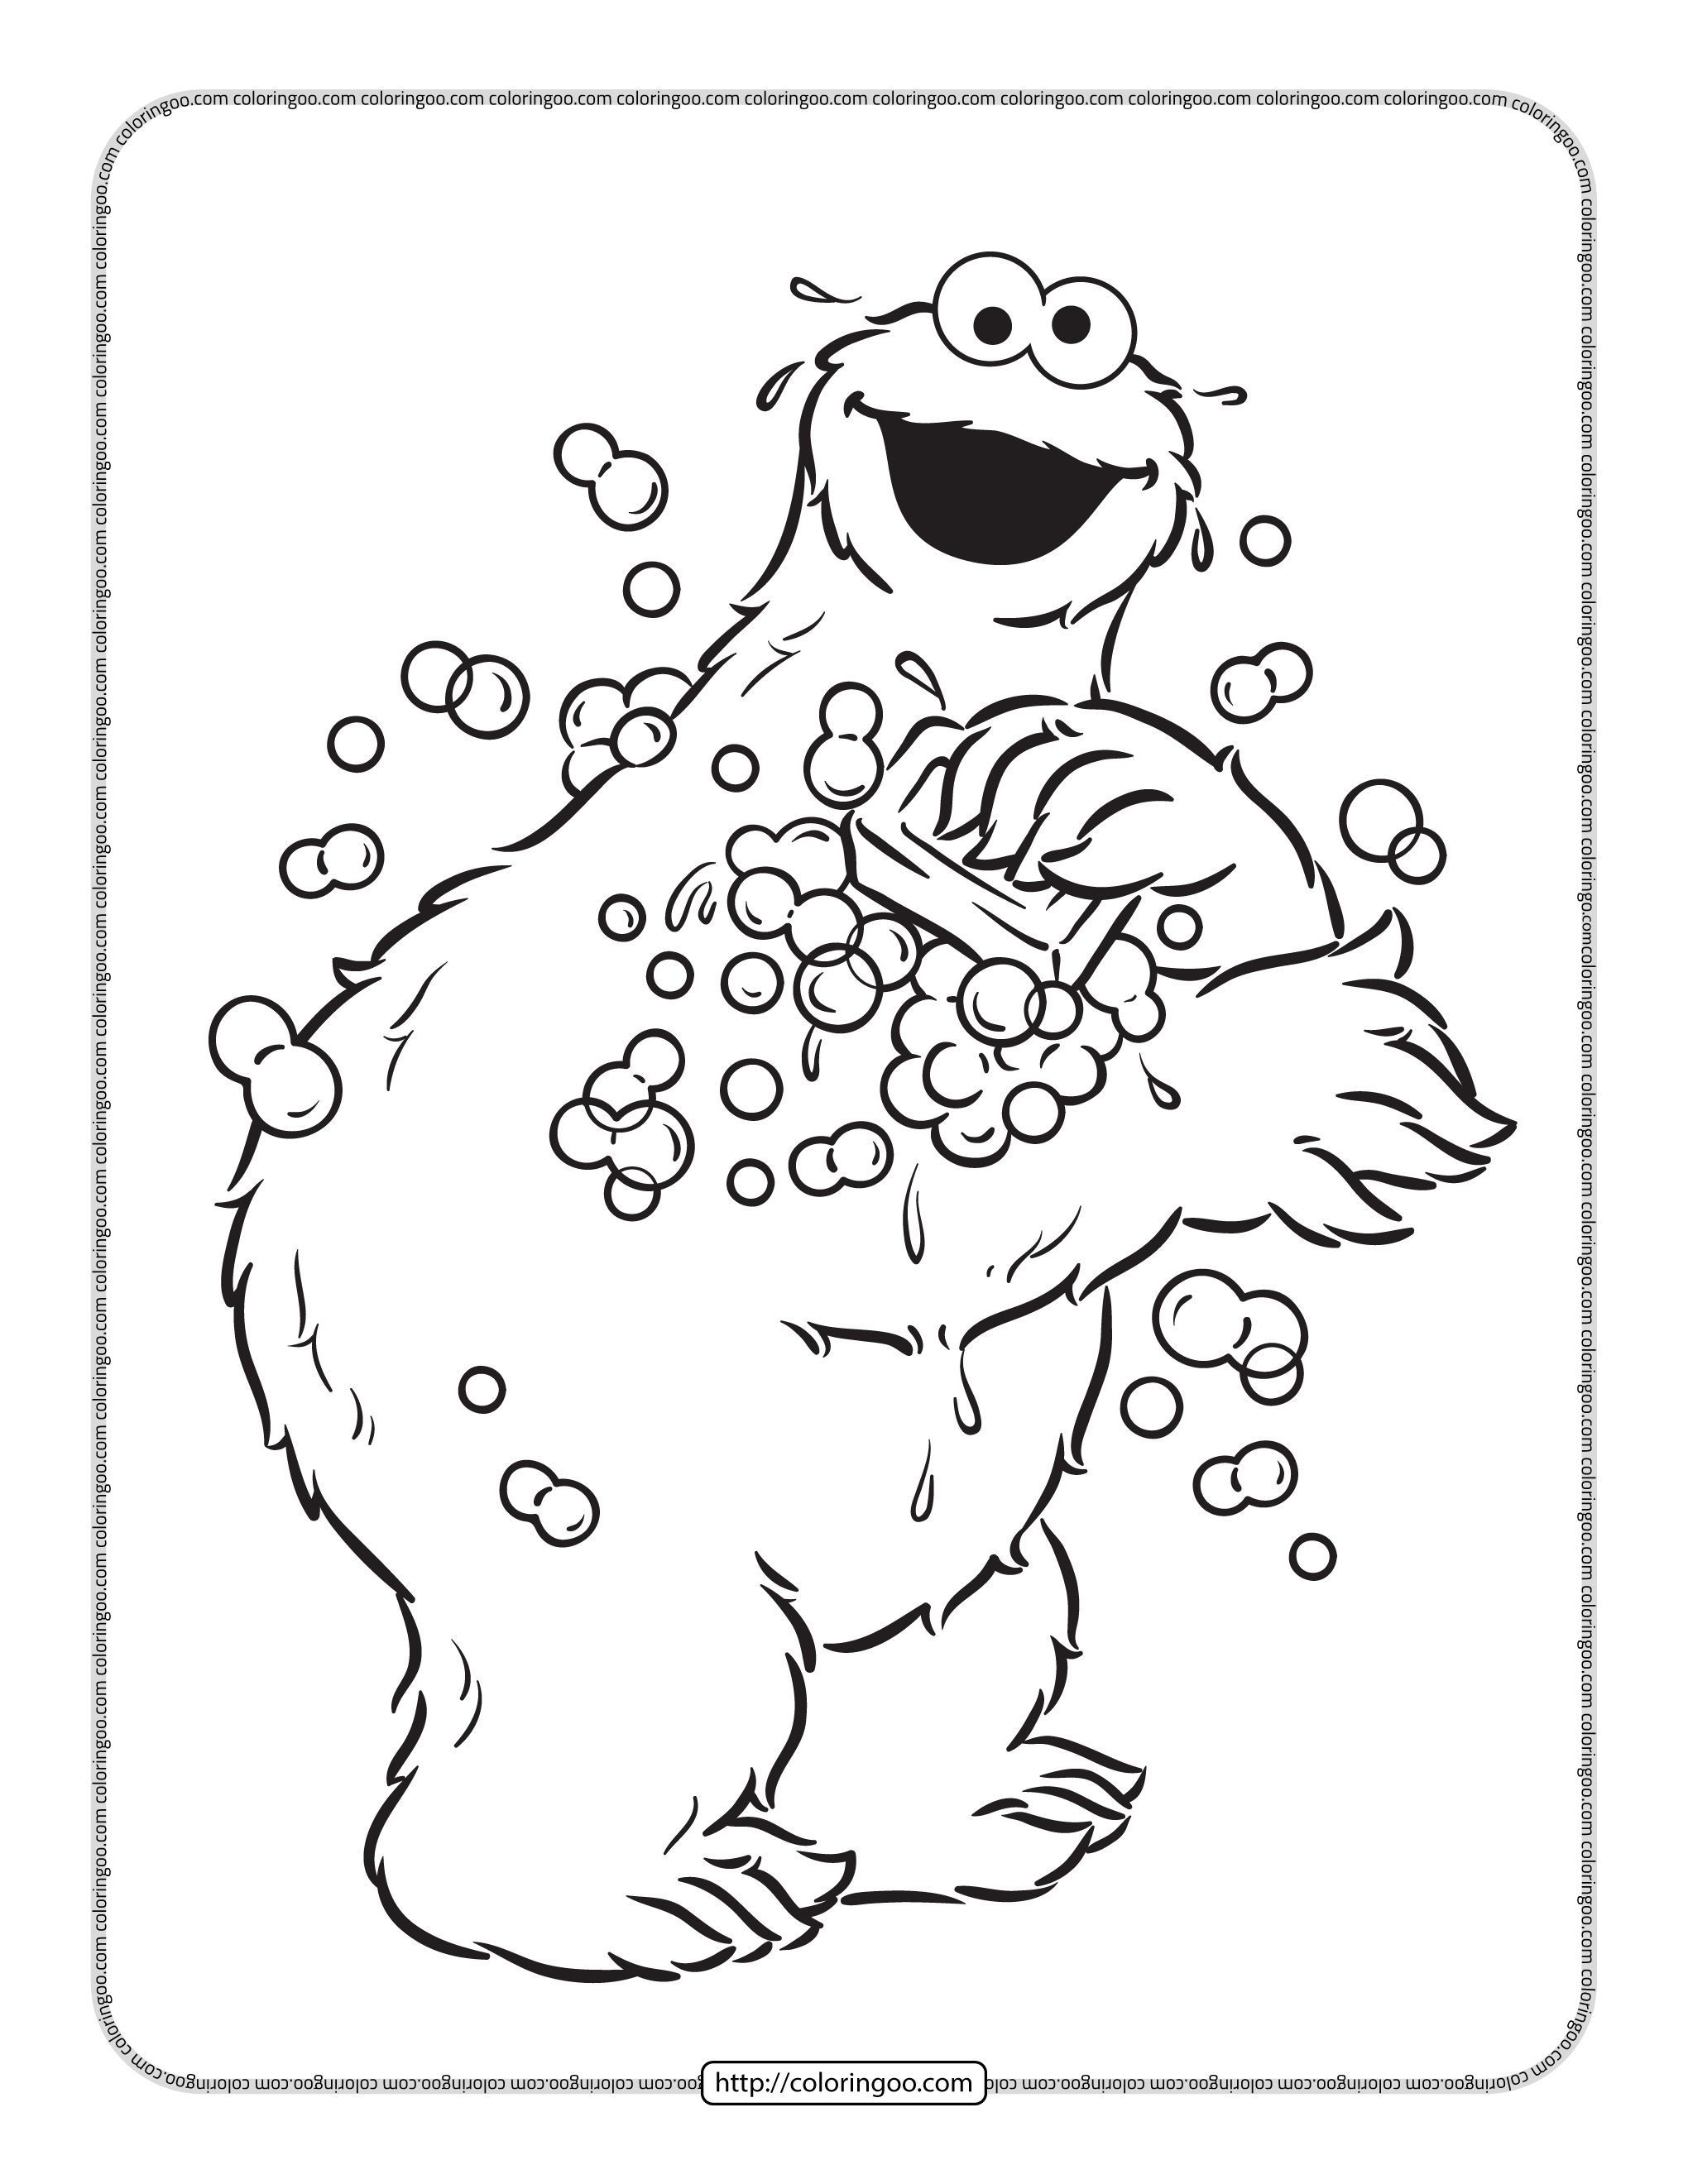 cookie monster is taking a bath coloring page